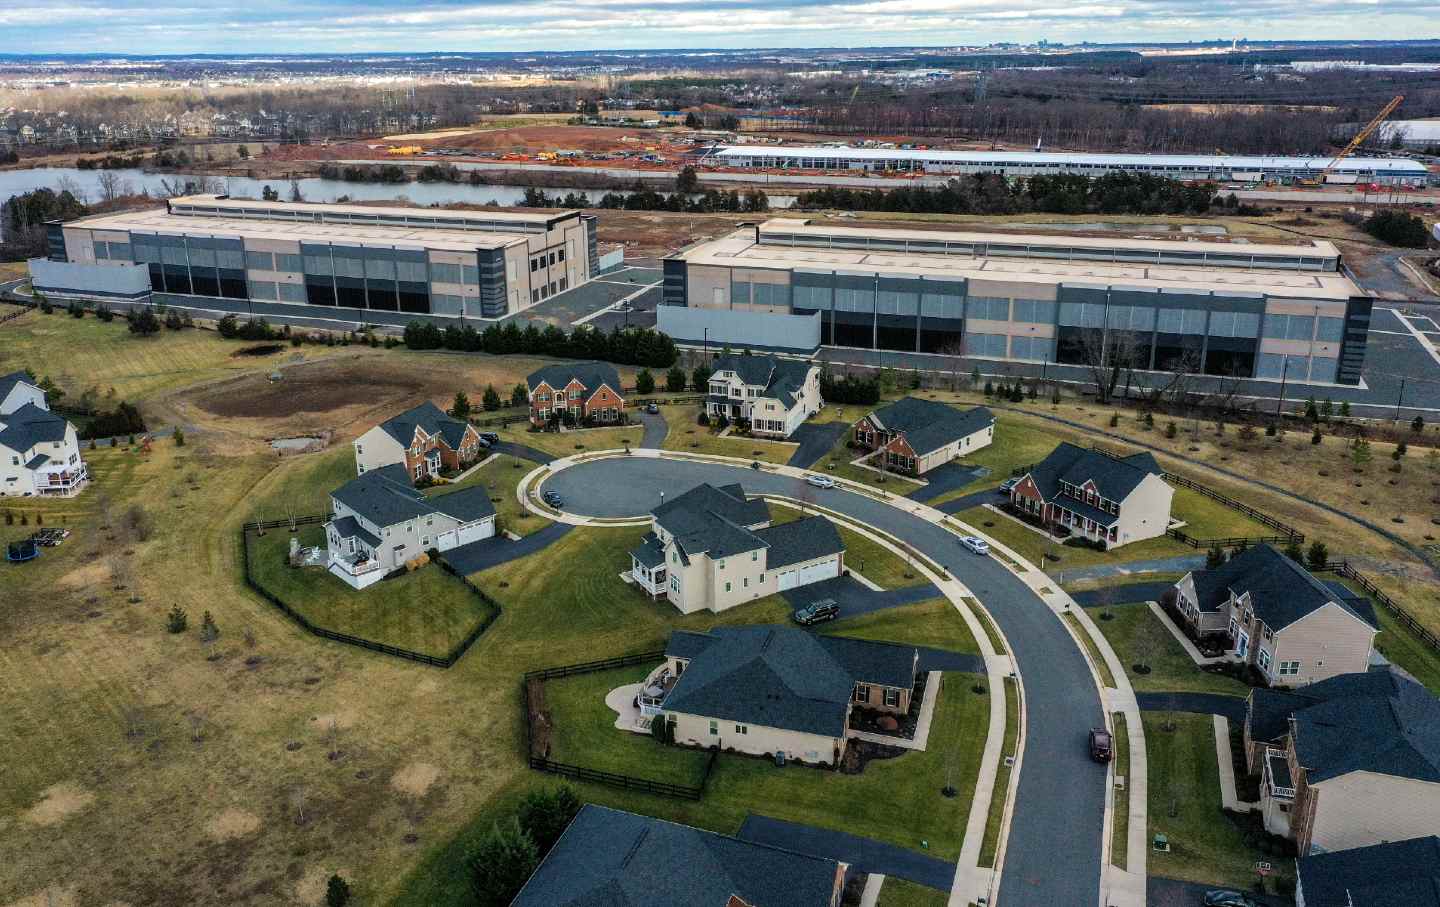 Amazon data centers loom over houses at the edge of the Loudoun Meadows neighborhood on January 20, 2023, in Aldie, Va. Microsoft is in the process of building data-center structures in the background.